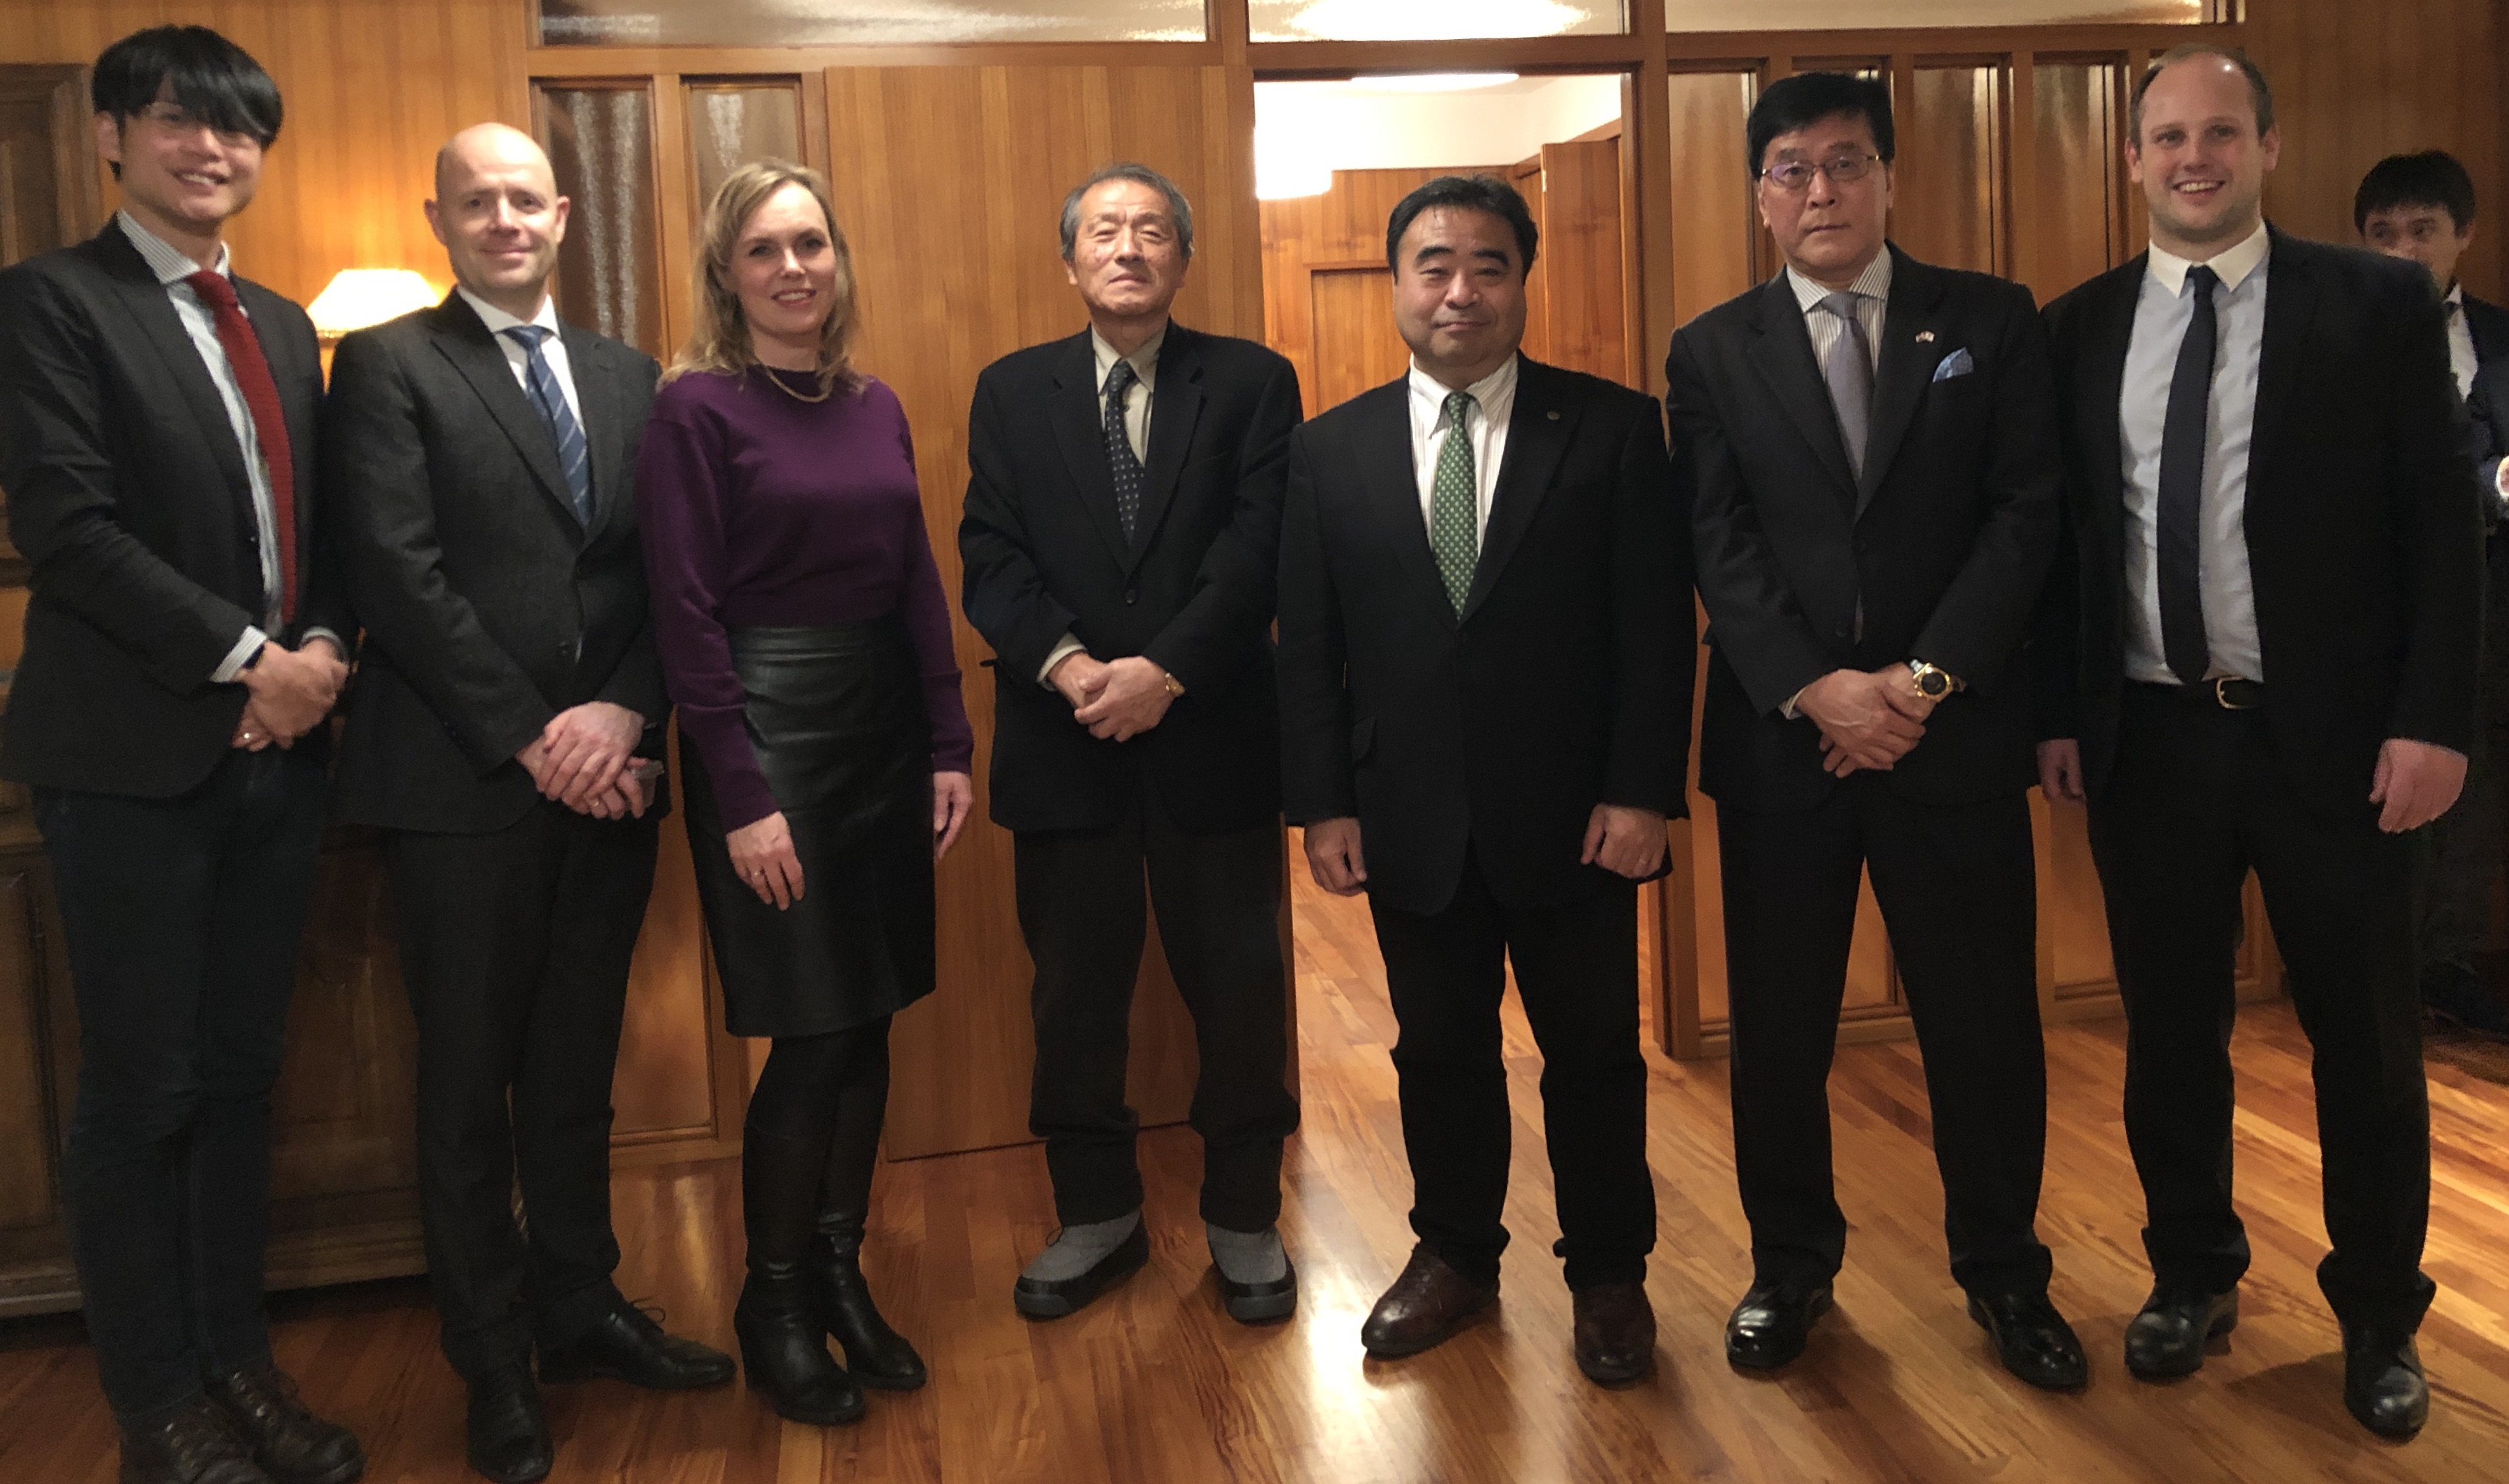 JDCC leadership with Japan Ambassador and Bolli Thoroddsen, CEO of Takanawa (nr. 1 from right)